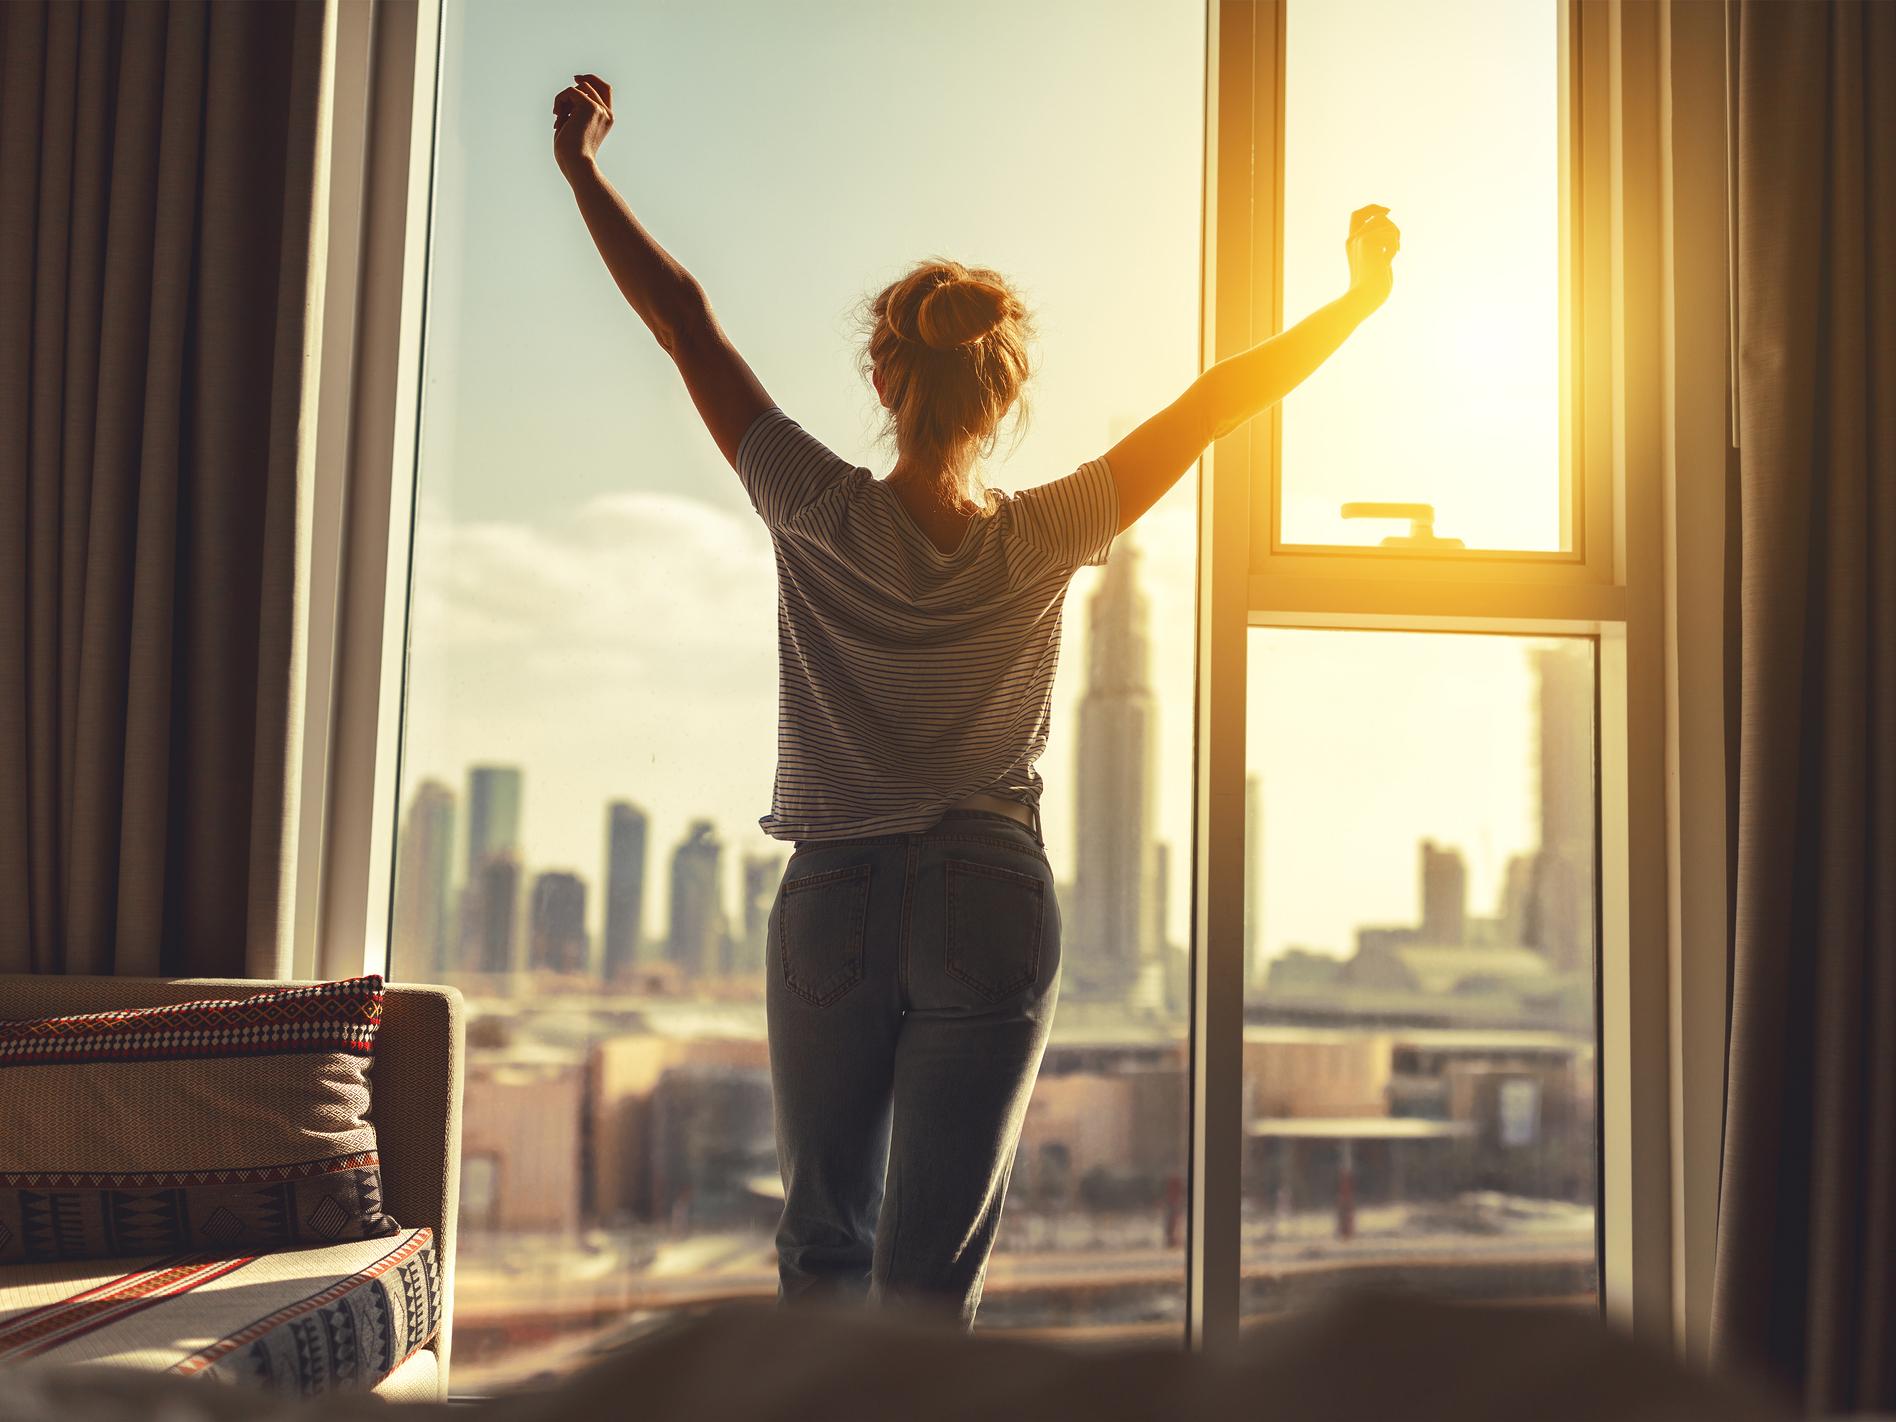 Majority of Britons would choose to wake up early to make the most of their free time